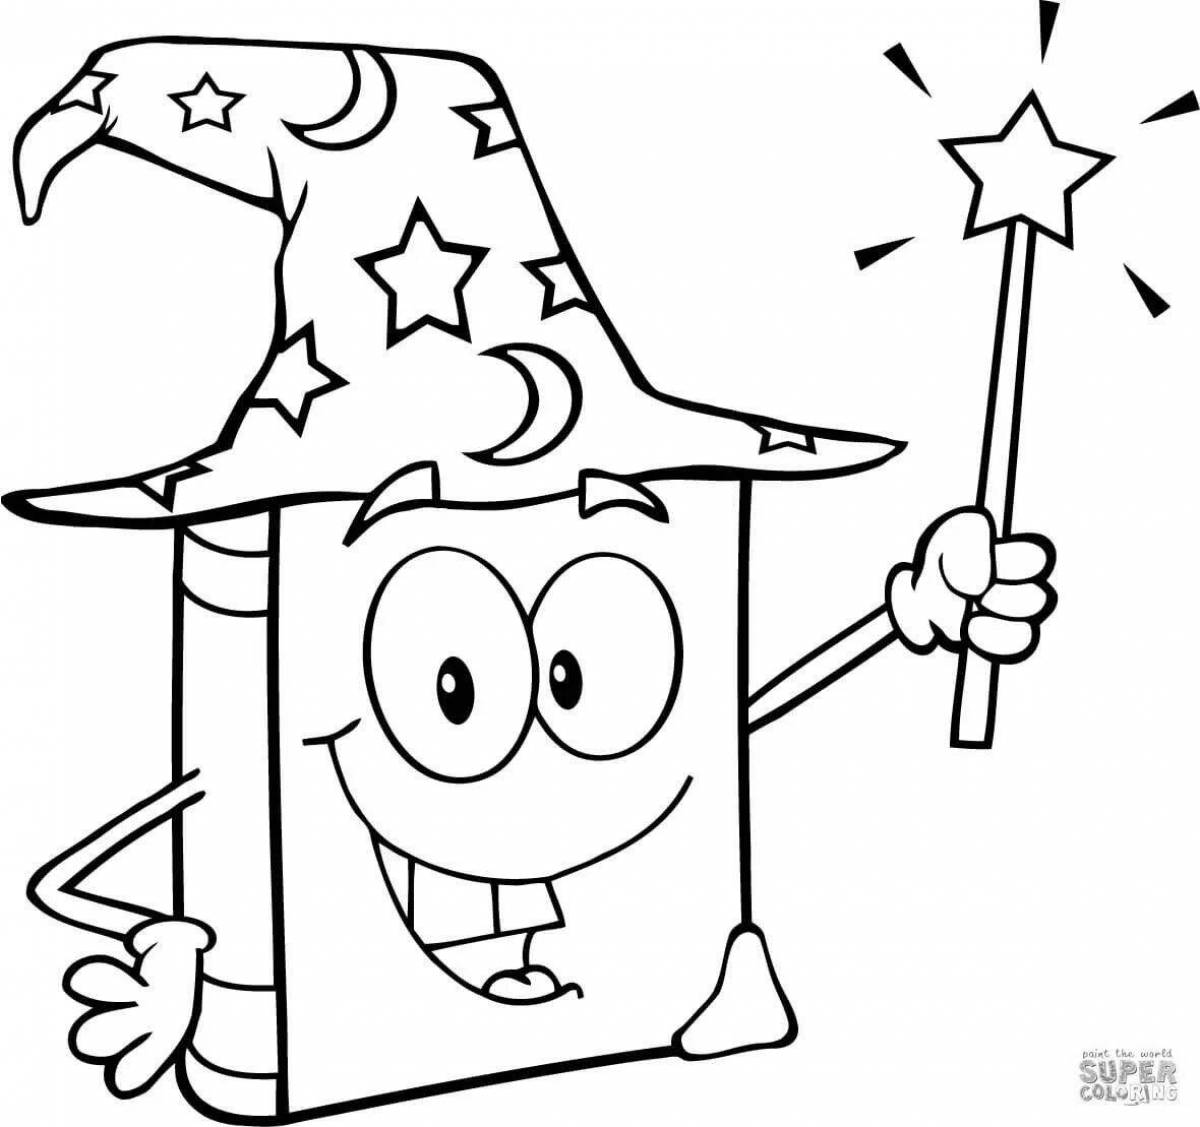 Magic wizard coloring pages for kids